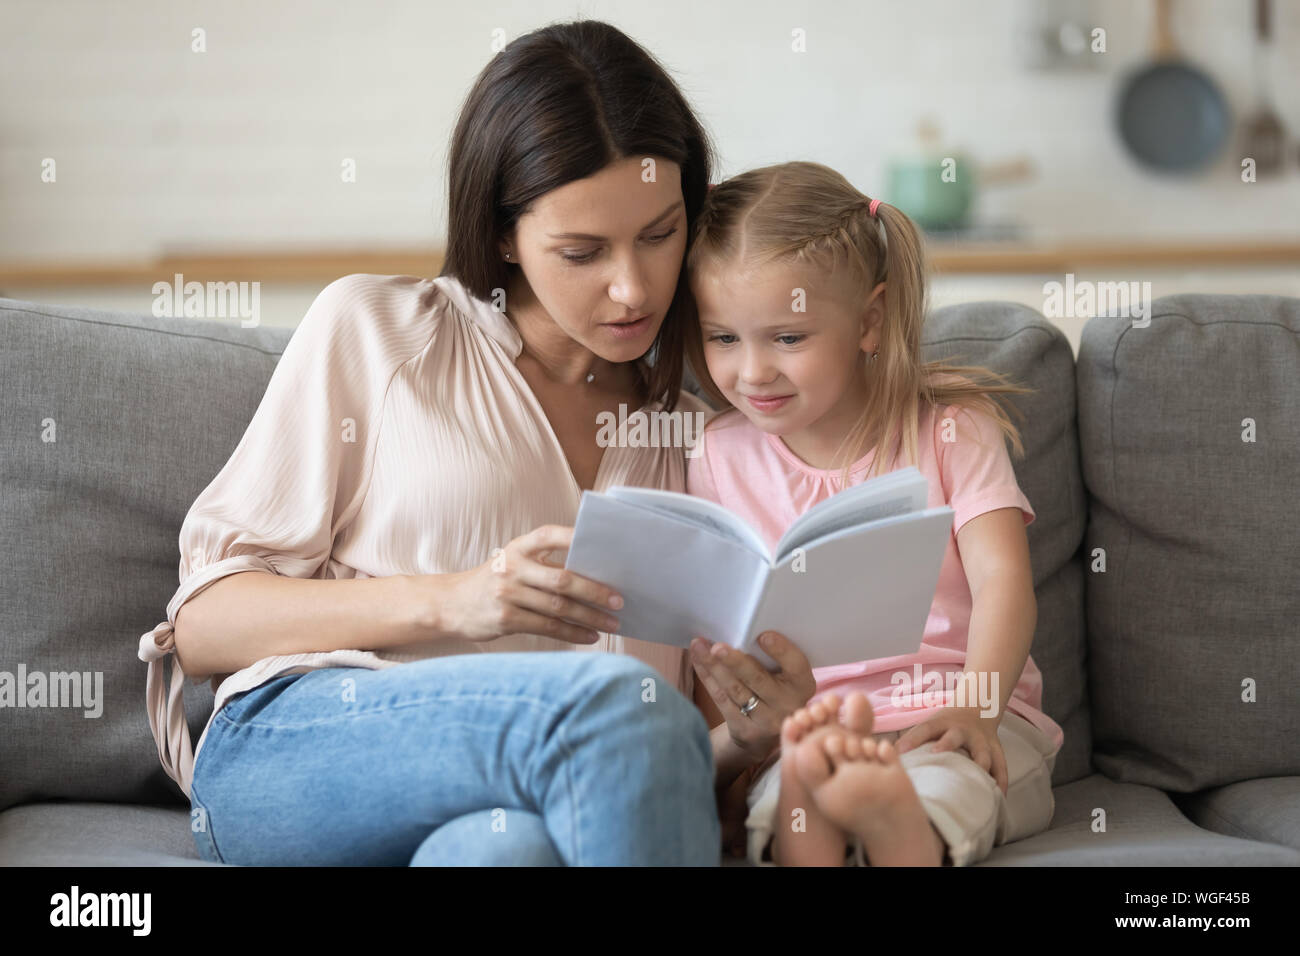 Mother and Daughter sitting on couch reading a book Banque D'Images